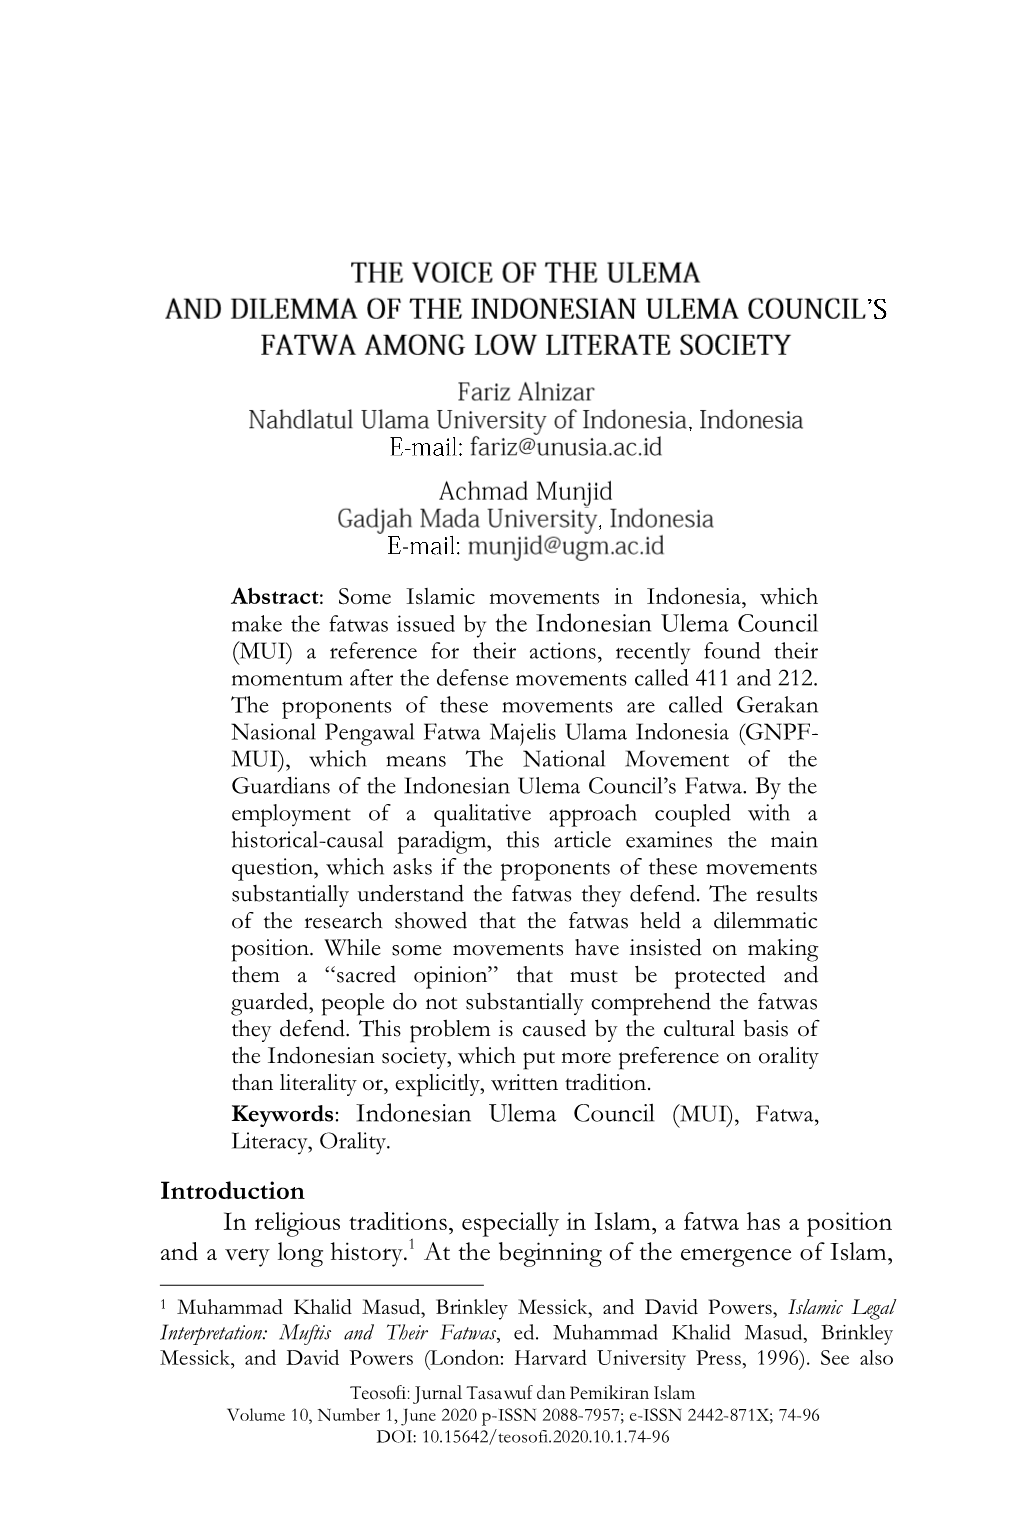 Indonesian Ulema Council (MUI), Fatwa, Introduction in Religiou